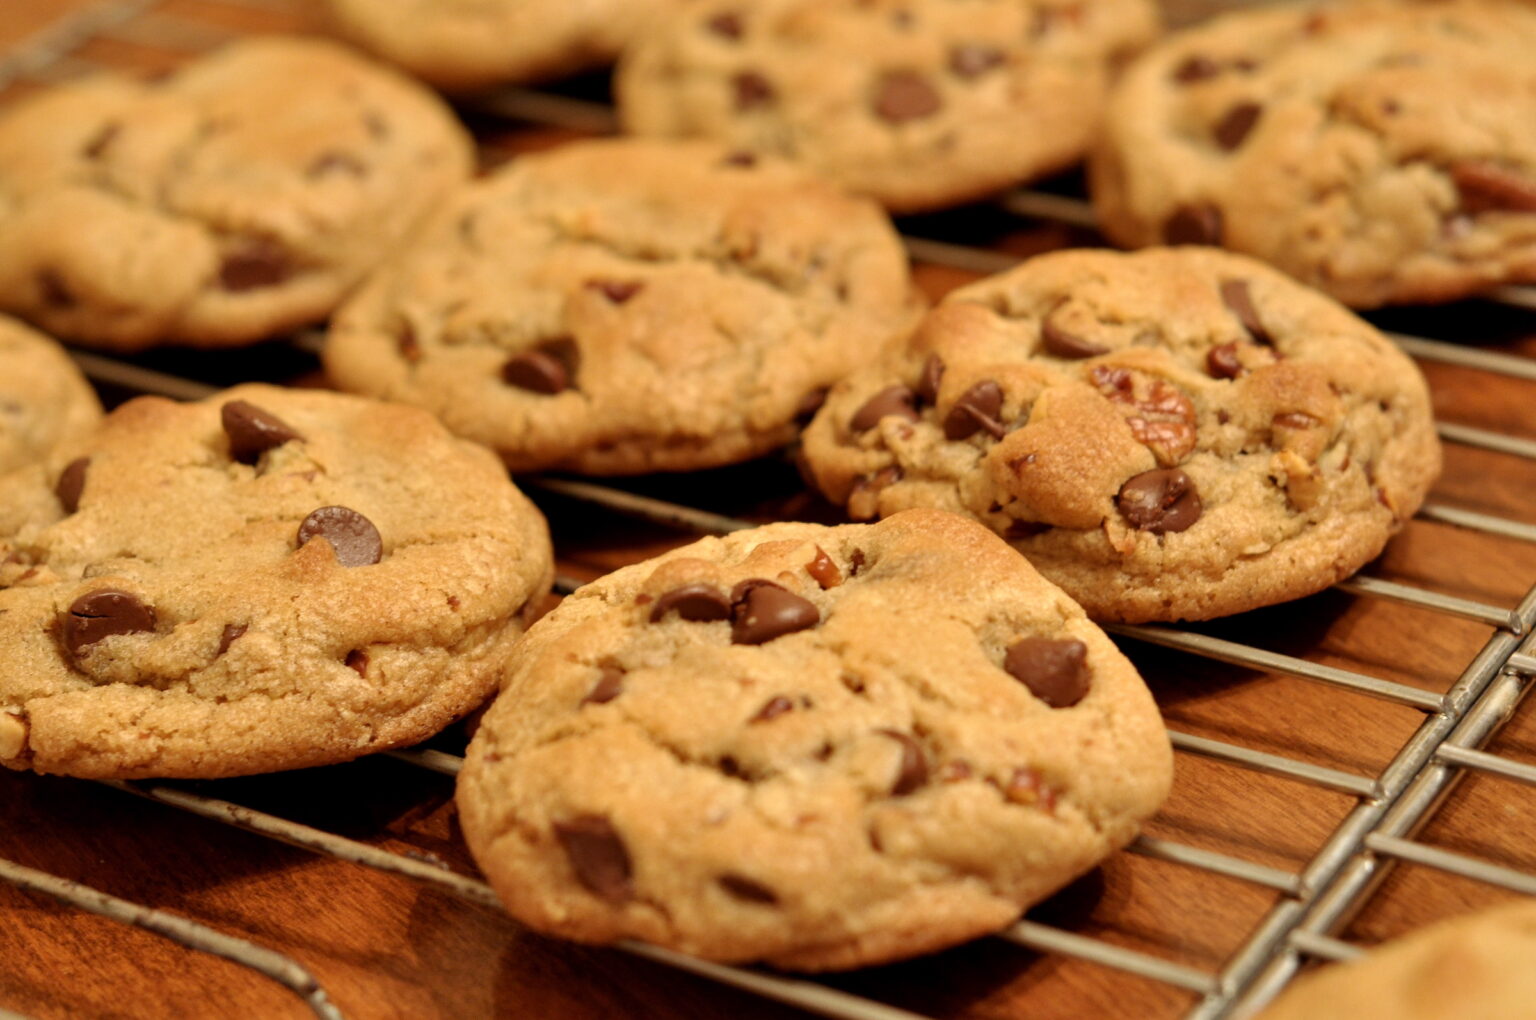 The sweetest day of the year has arrived. It's National Cookie Day in the USA! Here are some tasty recipes for you to try.